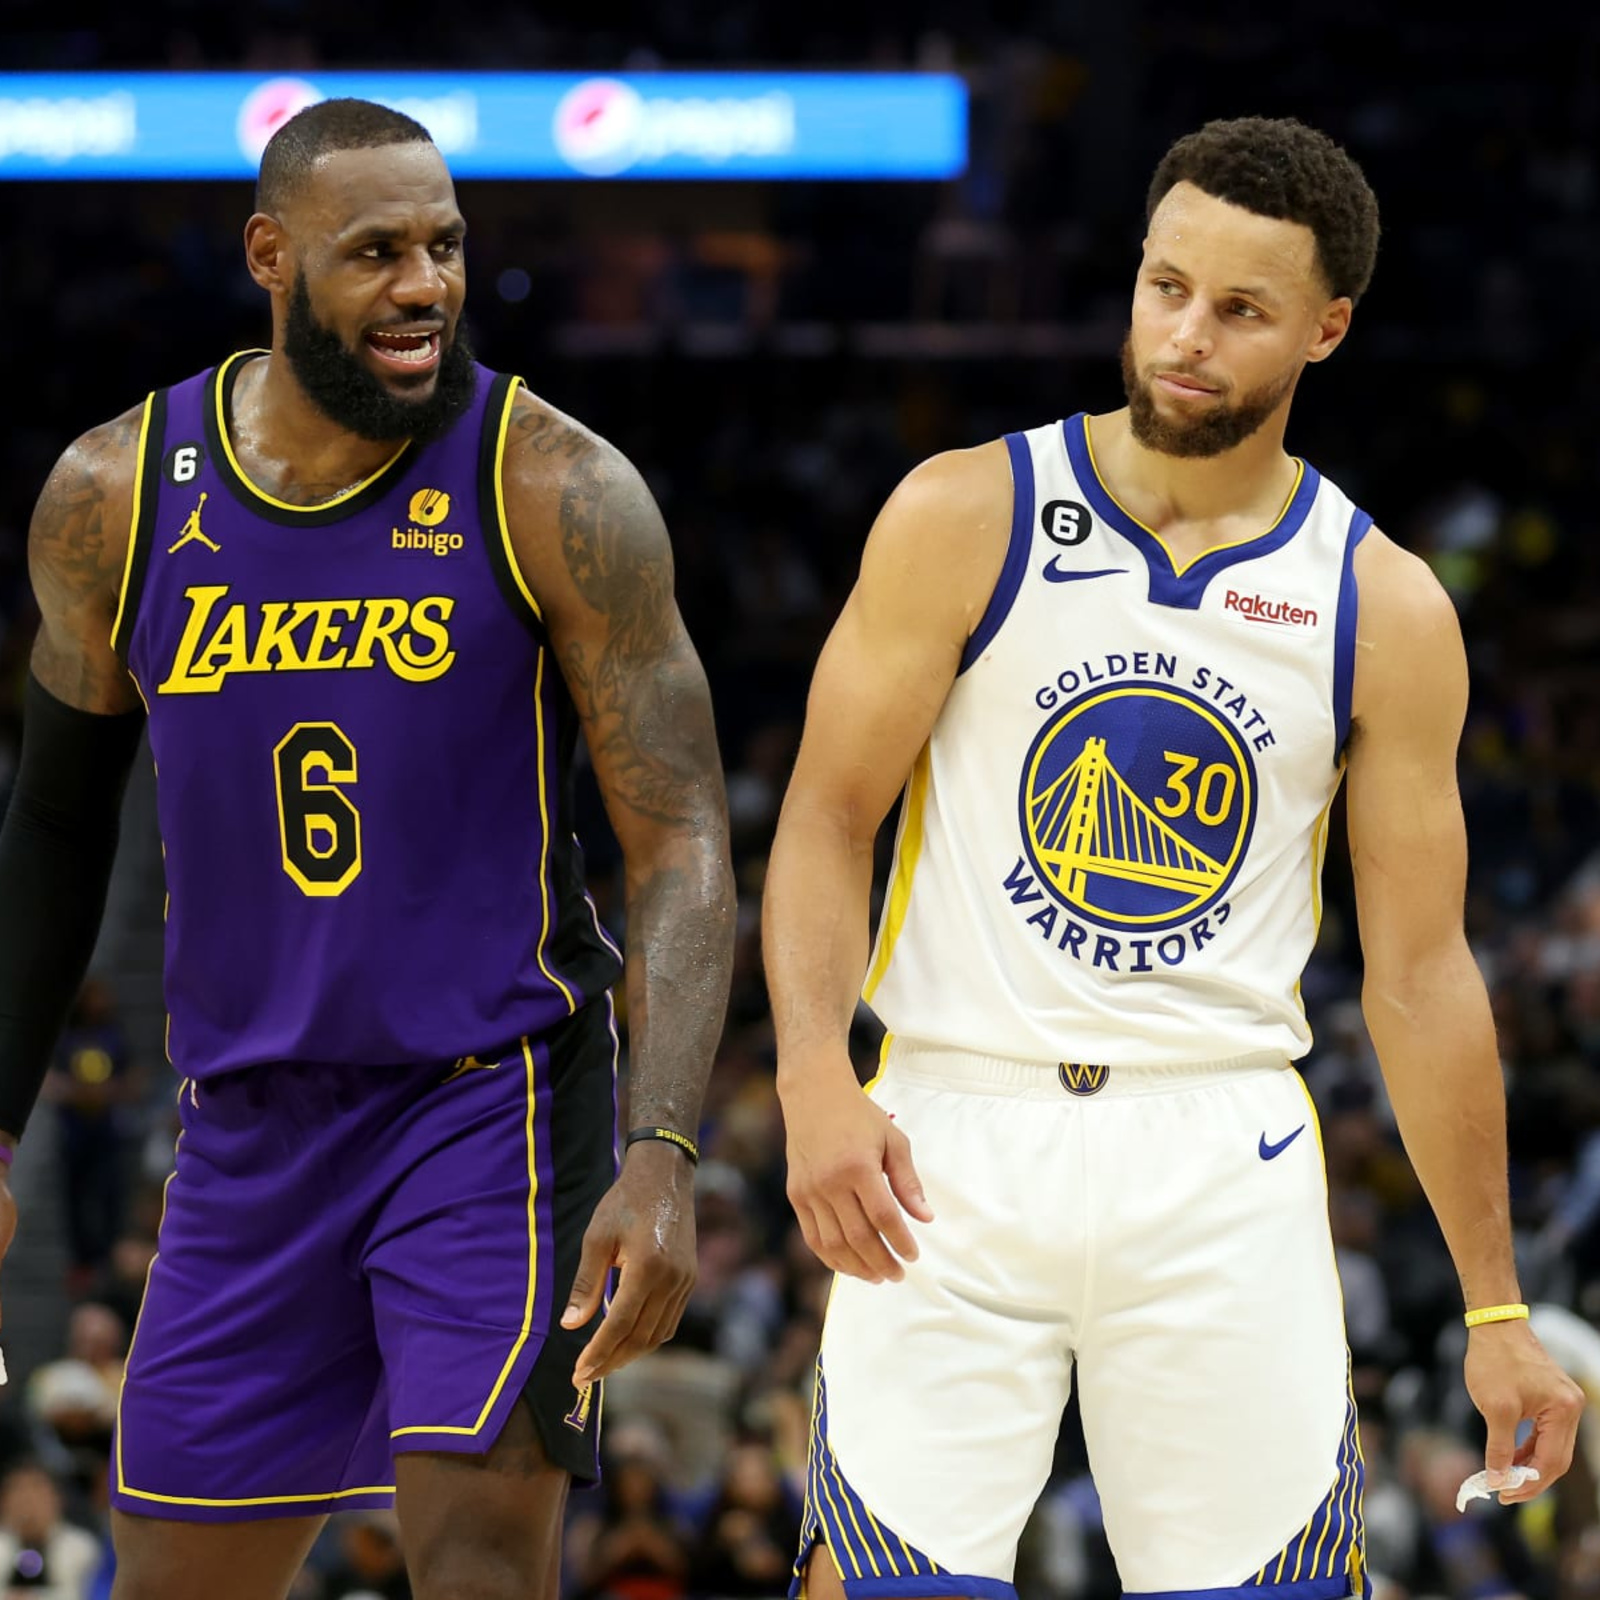 Lakers-Warriors scores series-high ratings - Sports Media Watch